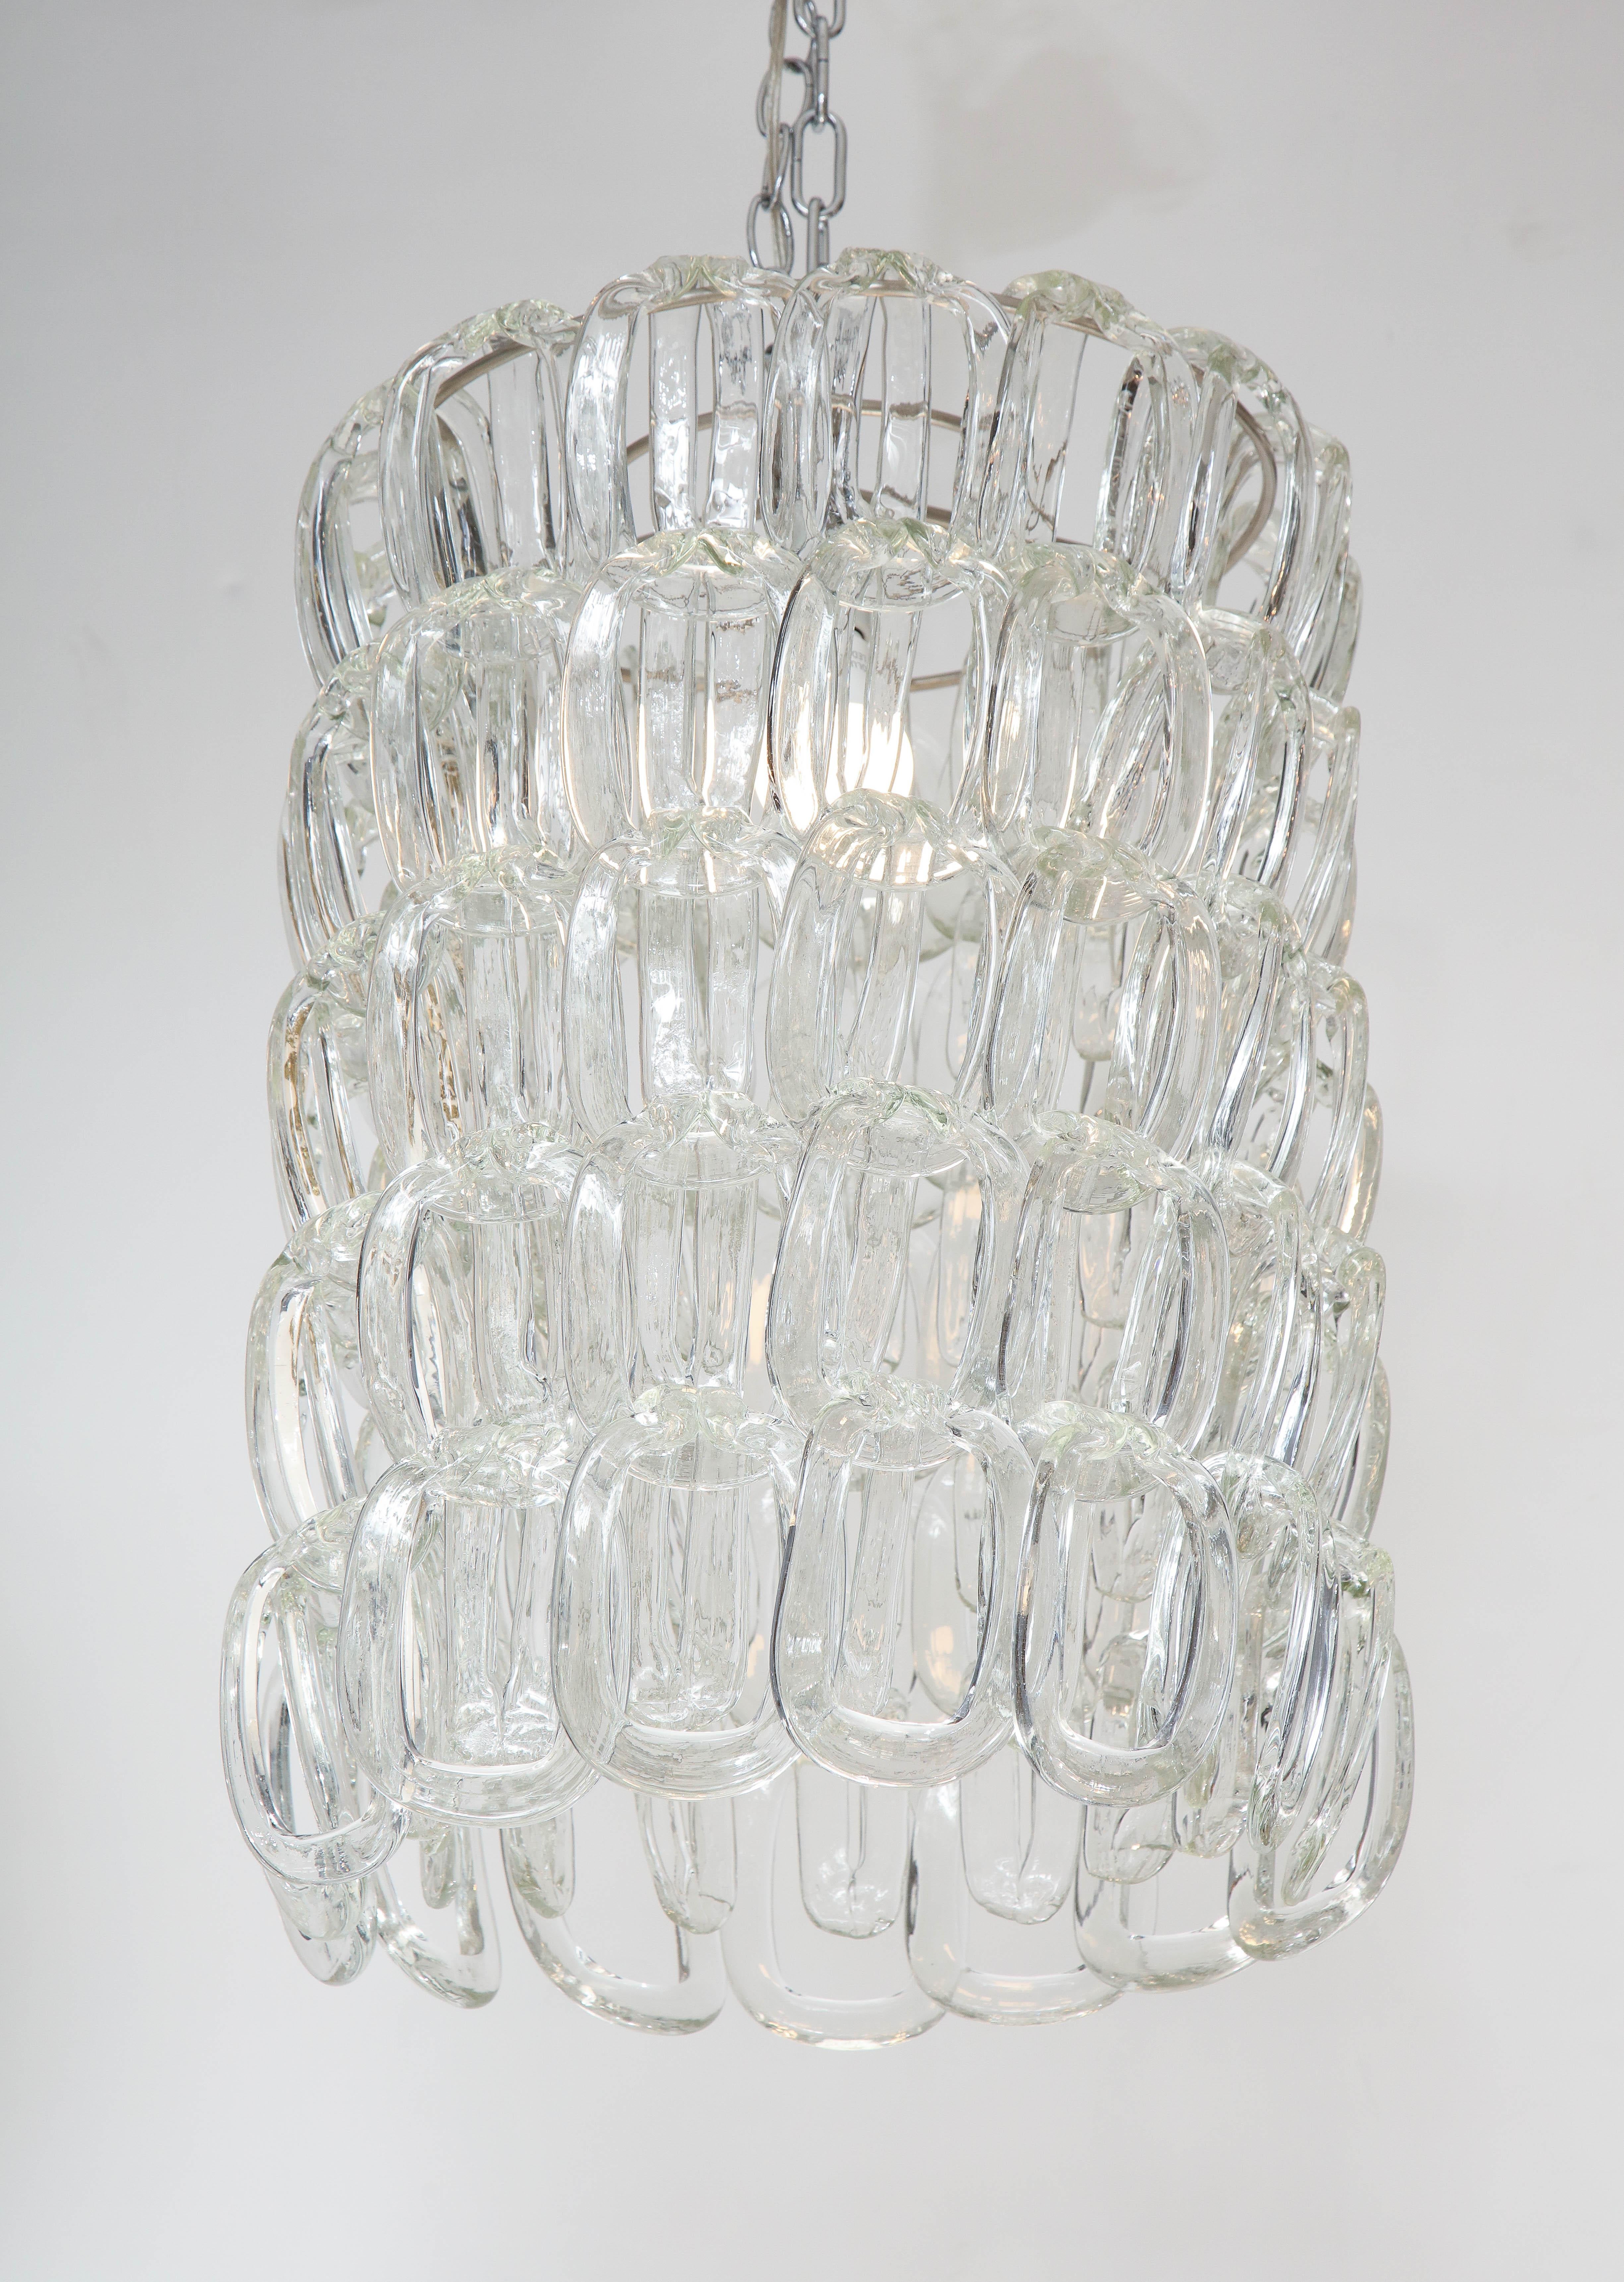 Giogali Chandelier by Angelo Mangiarotti for Vistosi In Good Condition For Sale In New York, NY